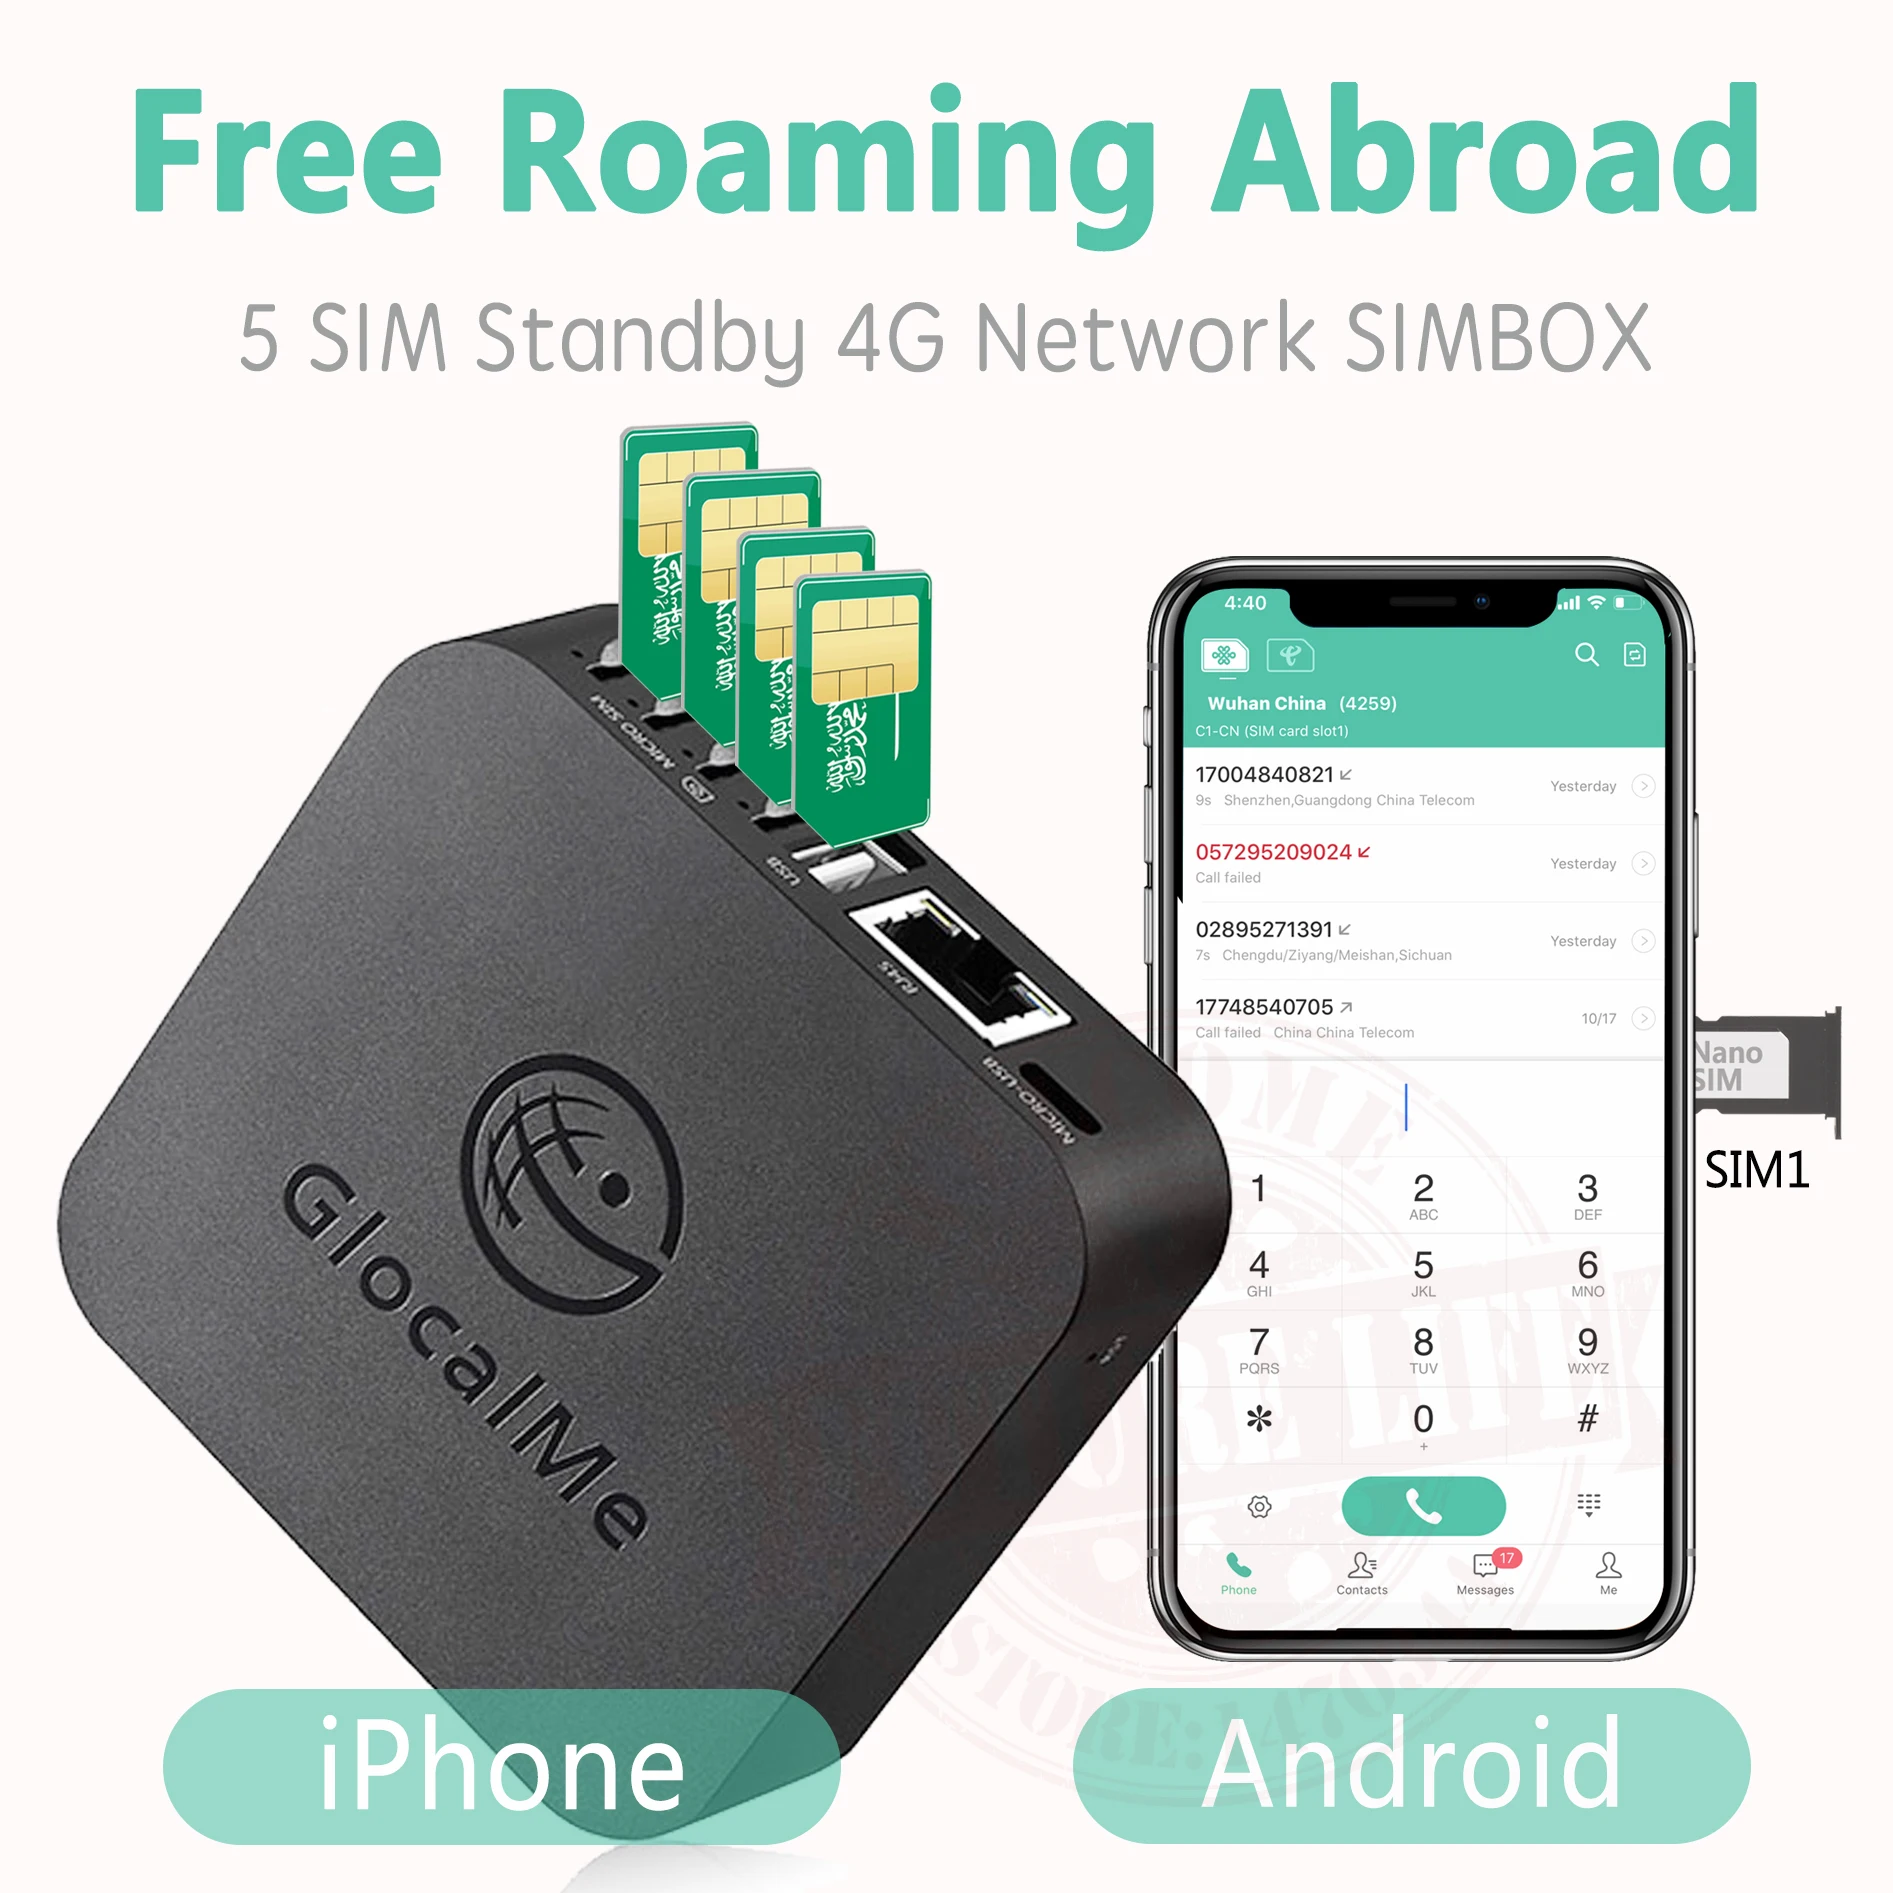 Glocalme Call Multi SIM Dual Standby No Roaming Abroad 4G SIMBOX for iOS  Android  No Need Carry WiFi / Data to Make Call SMS